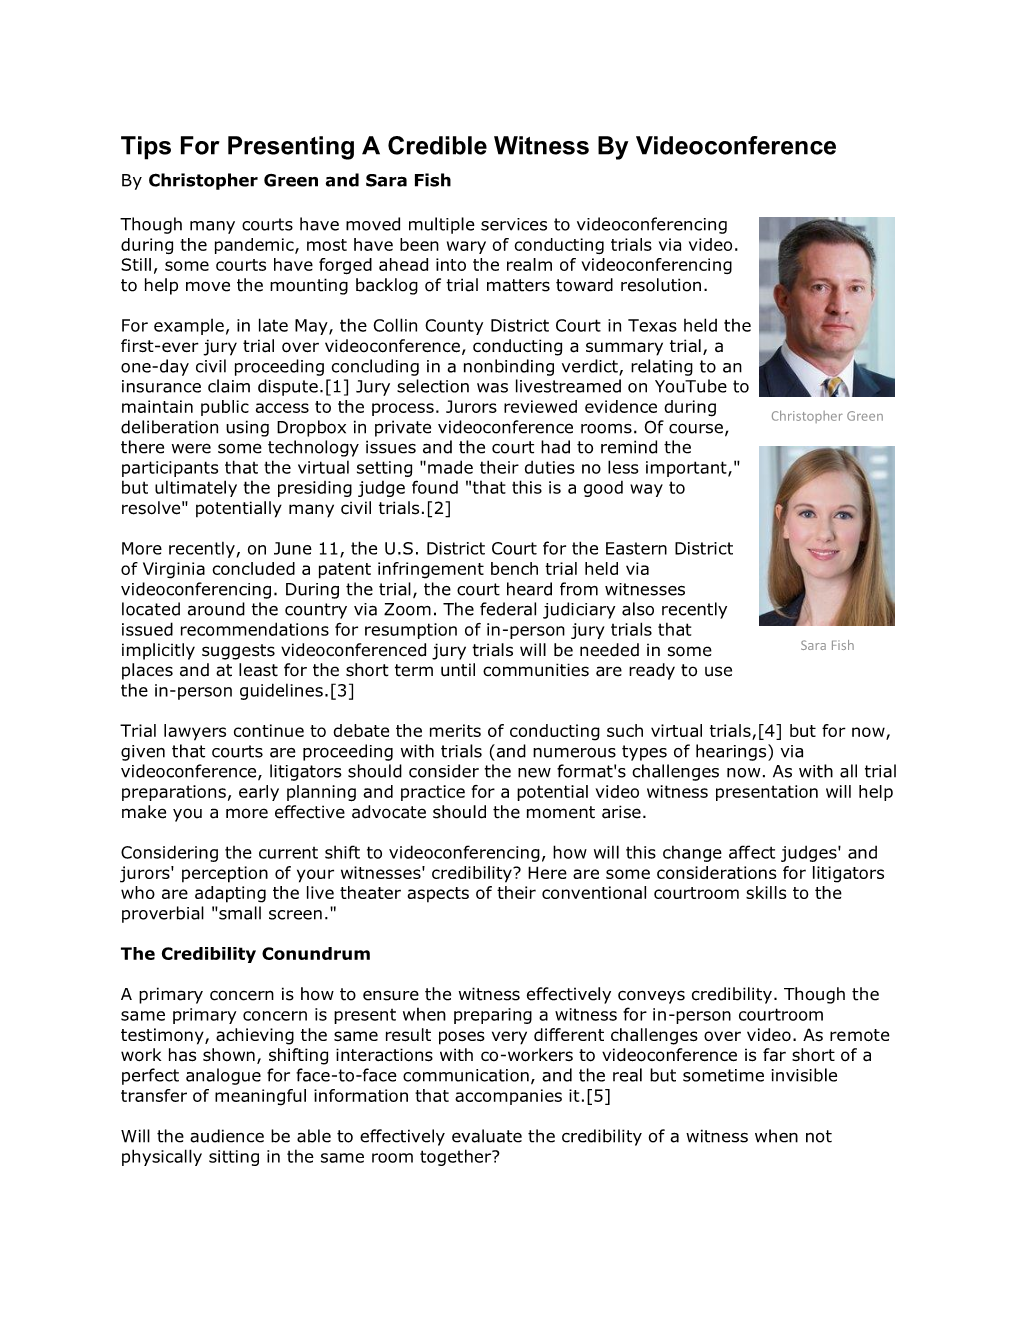 Tips for Presenting a Credible Witness by Videoconference by Christopher Green and Sara Fish